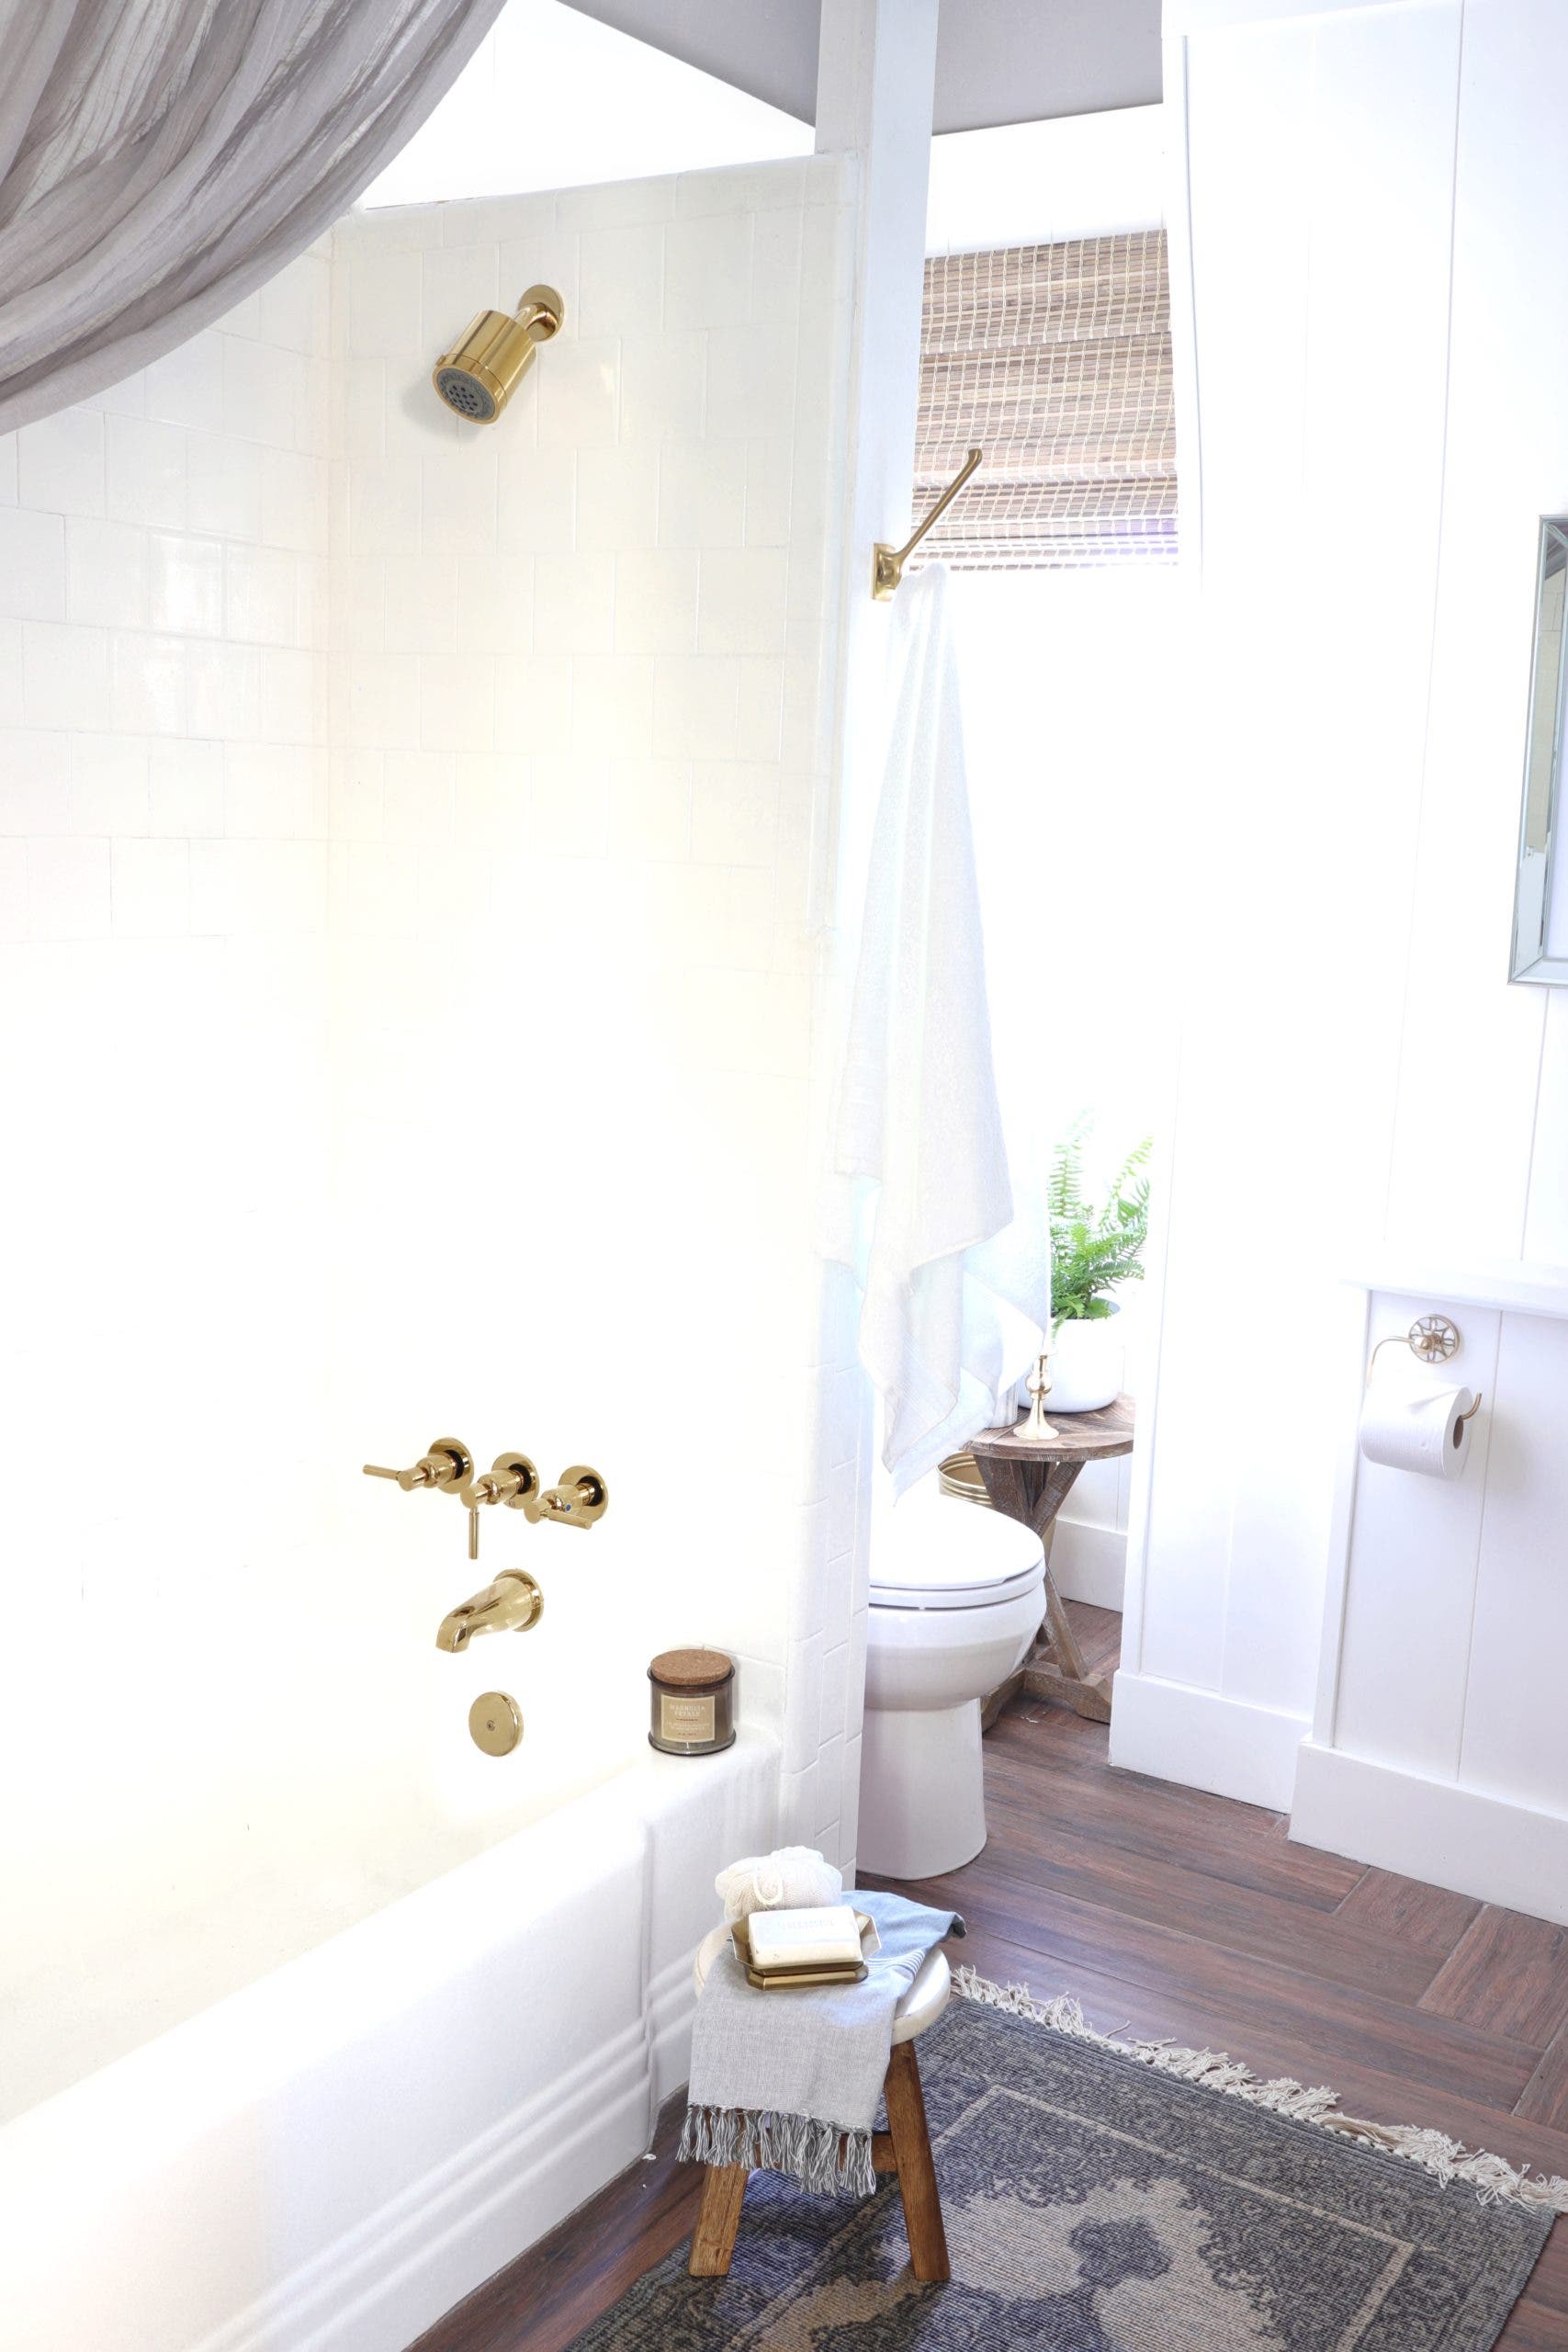 Showers, Bathtubs, or Shower and Bath Combinations: The Advantages of Each